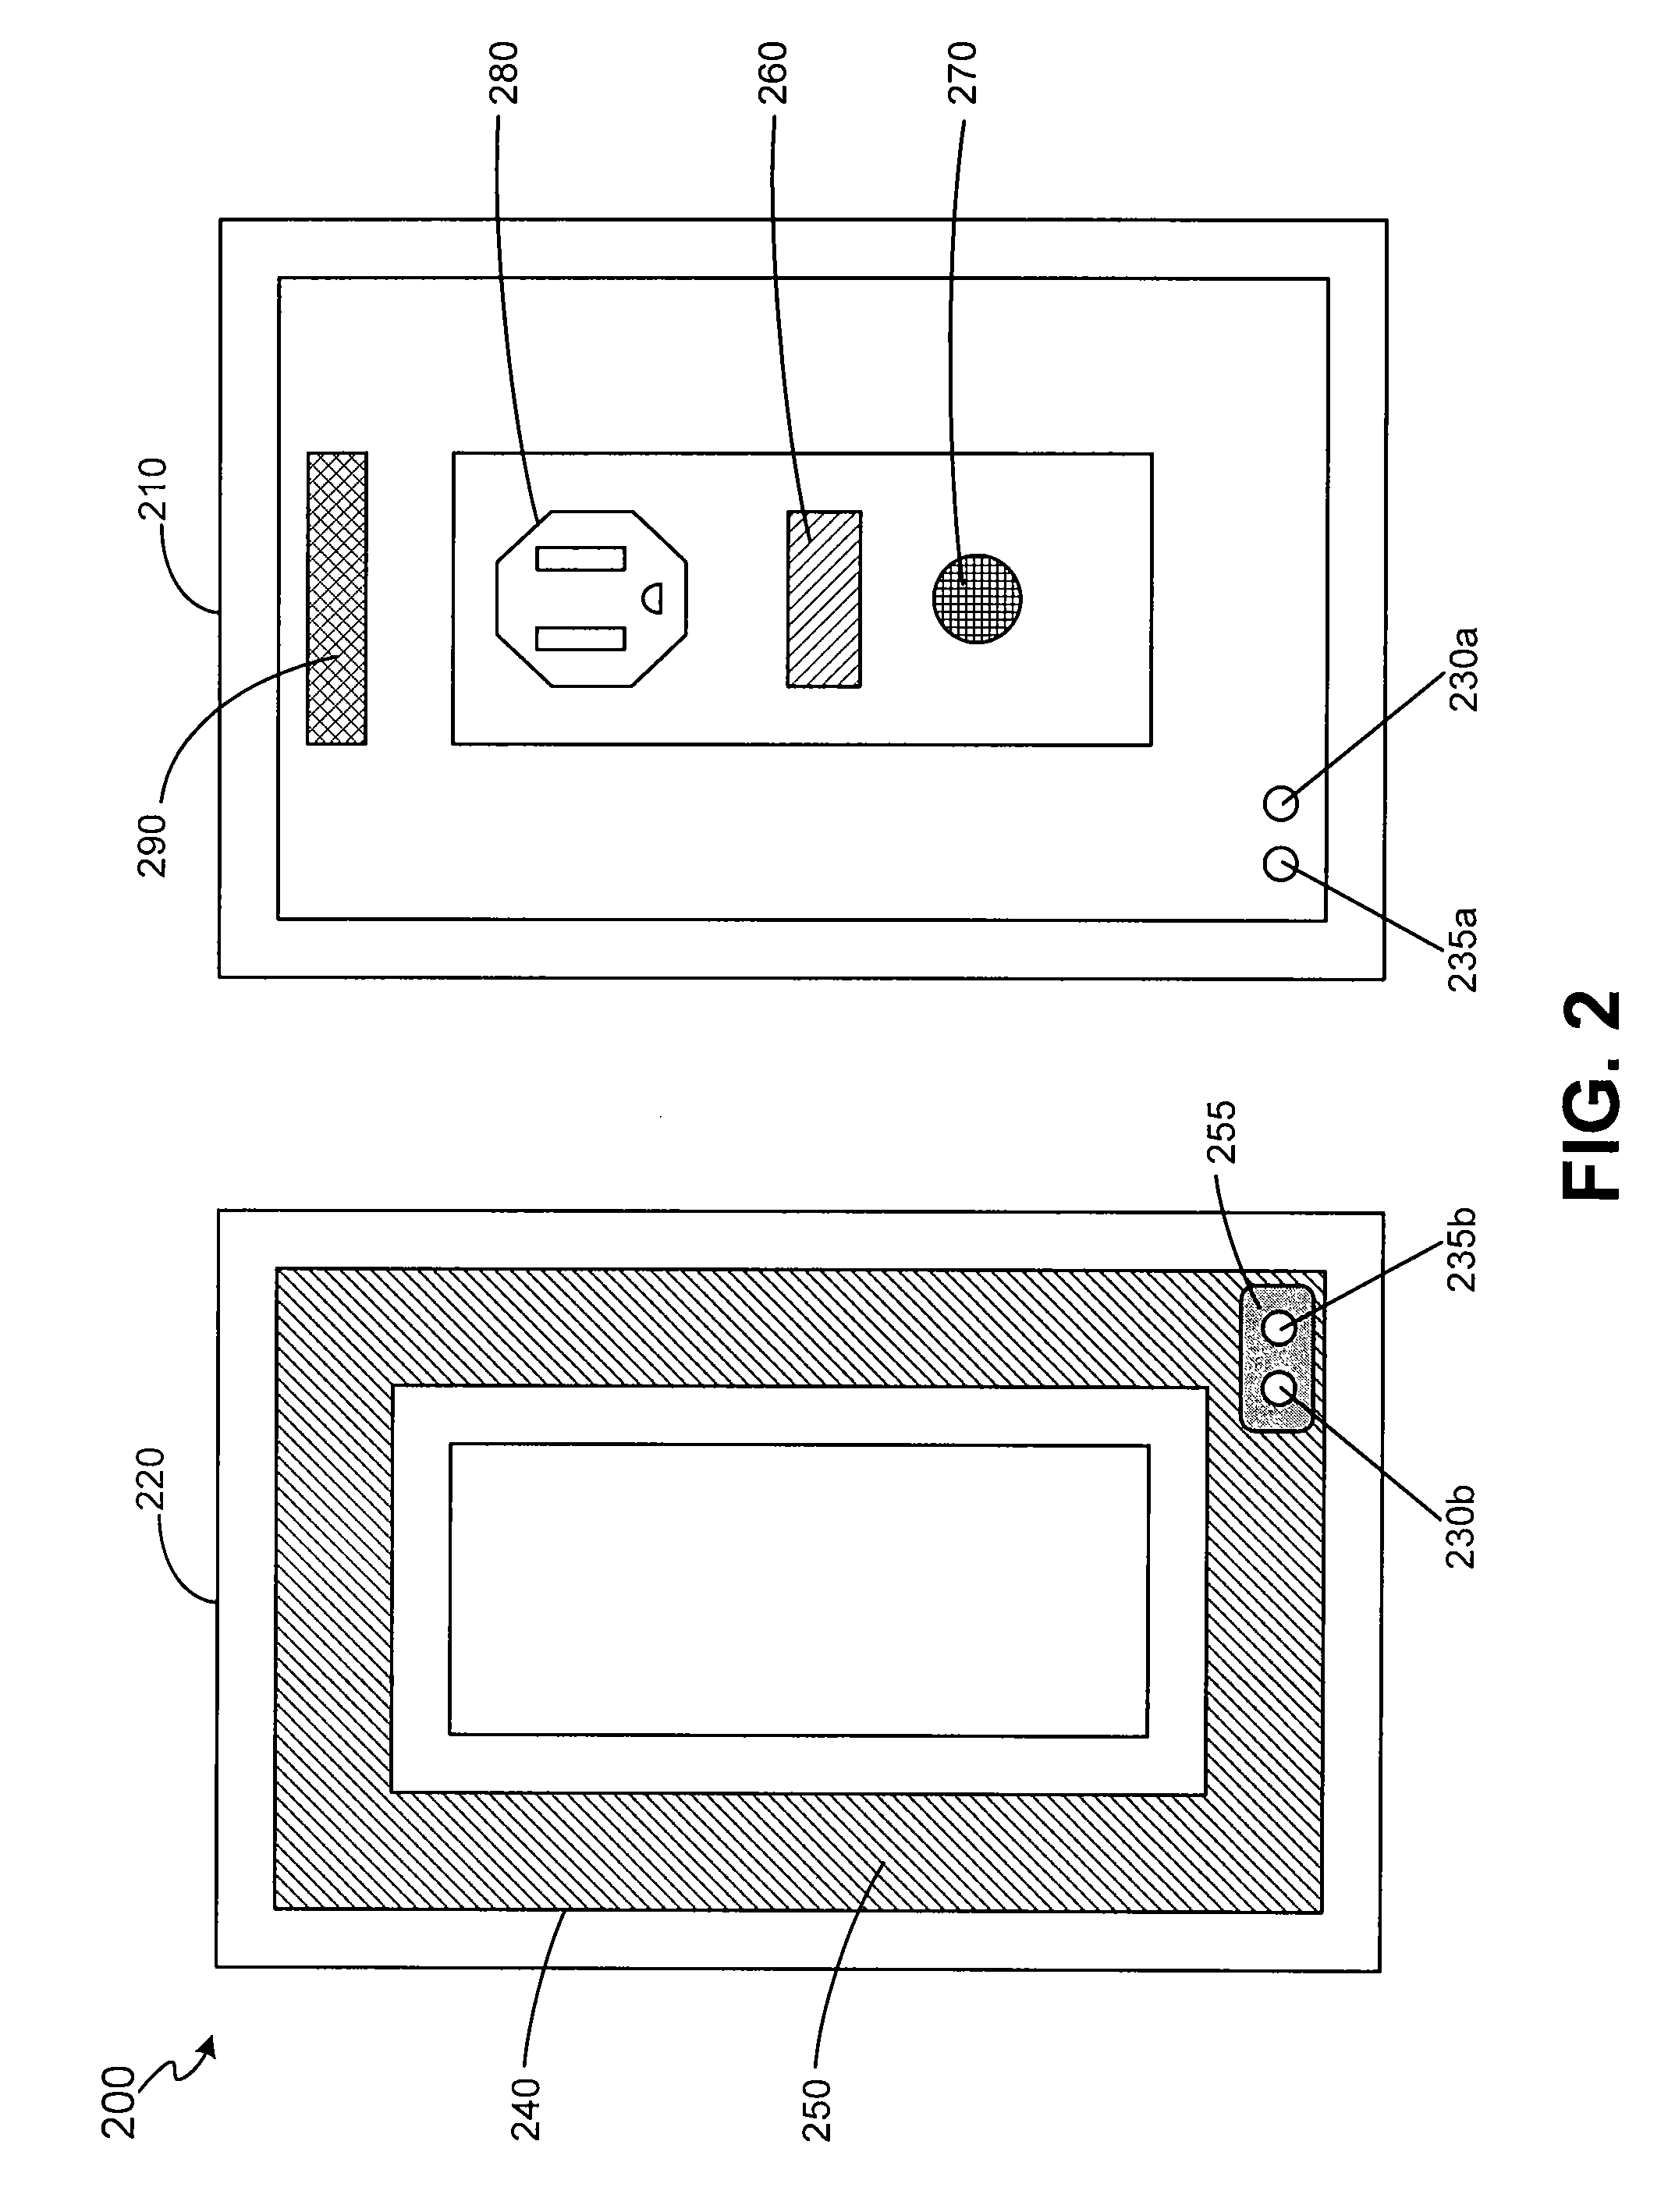 Vapor-emitting device with an active end of use indicator